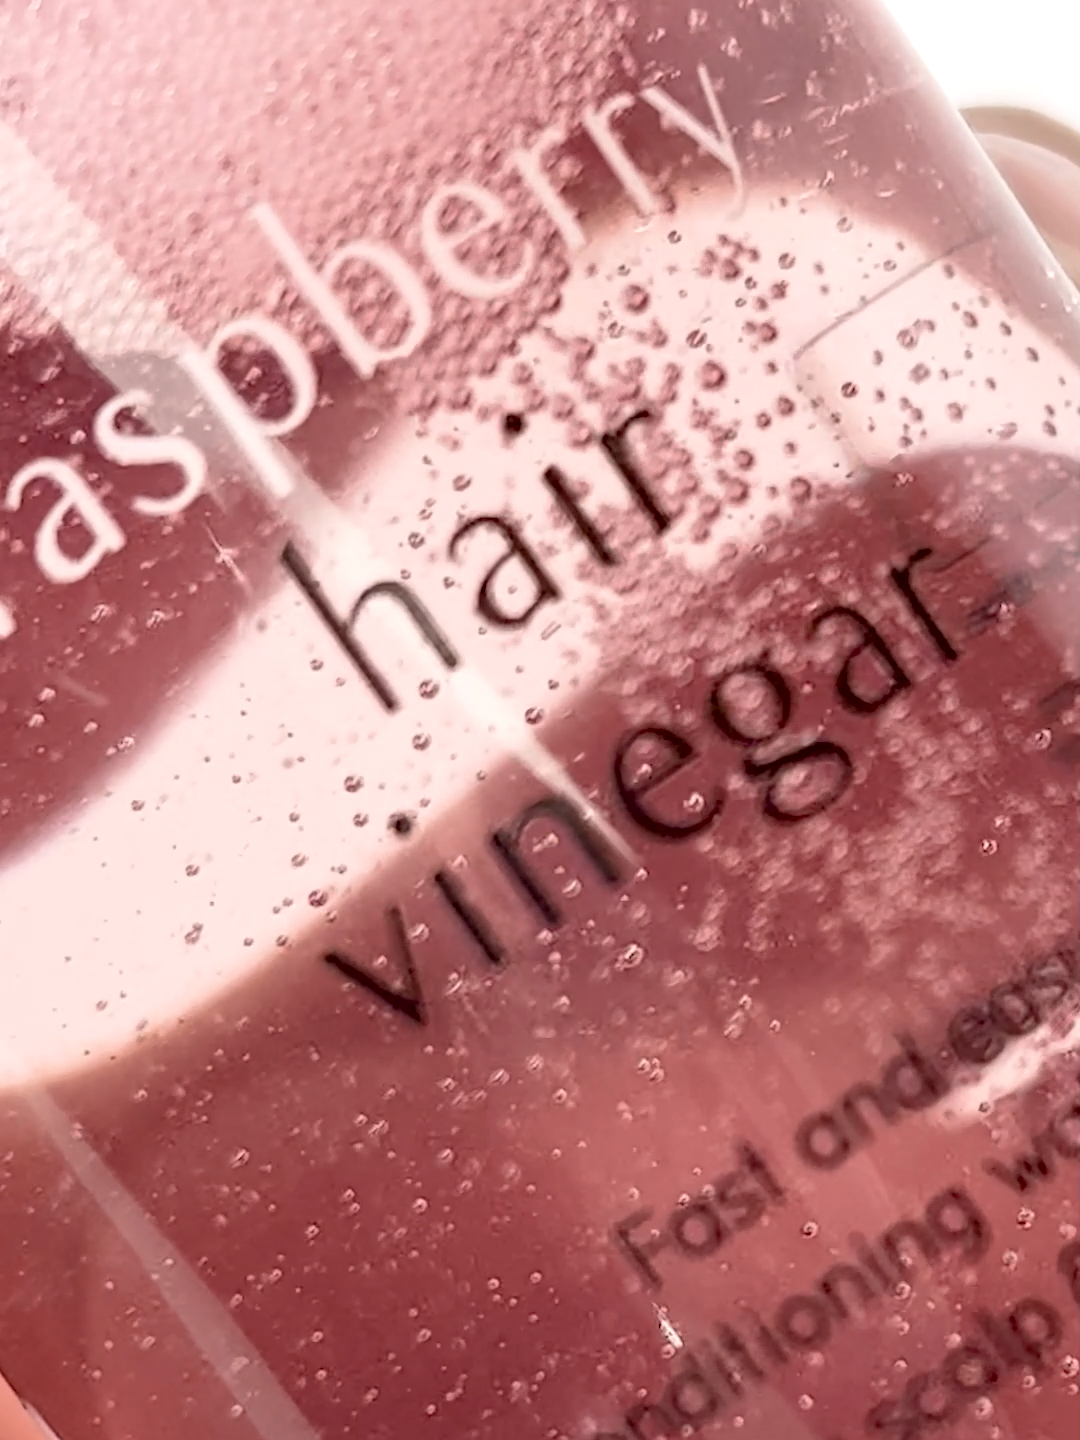 Refreshing raspberry scalp care Refreshing raspberry scent🍓 Care for damp head odor complete someone's shiny hair #Apieu I reviewed two types of vinegar hairline💗 [review product] 🍓Raspberry Hair Vinegar [200ml] 🍓Raspberry Vinegar Hair Mist [105ml] 🍓Natural vinegar? It is a mildly acidic base that takes care of both scalp and hair healthily, and the acidic ingredients of naturally derived vinegar help balance oil and moisture 🍓Raspberry Hair Vinegar [200ml] Hair vinegar that can care for scalp and hair gloss After shampooing, you can wash it from the scalp and massage it to nourish both the scalp and hair, and care for glossy hair👀 Even after taking a shower, my scalp was refreshed and I liked the refreshing raspberry scent💕 🍓Raspberry Vinegar Hair Mist [105ml] It is a mist that can care for your hair anytime, anywhere If you smell the top of your head when you go out, you can't put perfume on your scalp, but with this mist, you can take care of the top of your head refreshingly It takes care of static electricity and dry hair smoothly, so I'm glad it doesn't become damp👍 It's convenient to carry even in a small bag if you transfer it to a small spray bottle! 💬After shampooing, take care of your hair with vinegar, and use hair mist when you go out The fragrant raspberry scent lasts all day😊 🛒You can see the products at the Shopee [DOER] shop Quickly navigate to the profile link🖐 --------------------------------- #Hairmist  #hairvinegar  #Haircare  #scalpcare  #KBEAUTY  #SHOPEEDOER